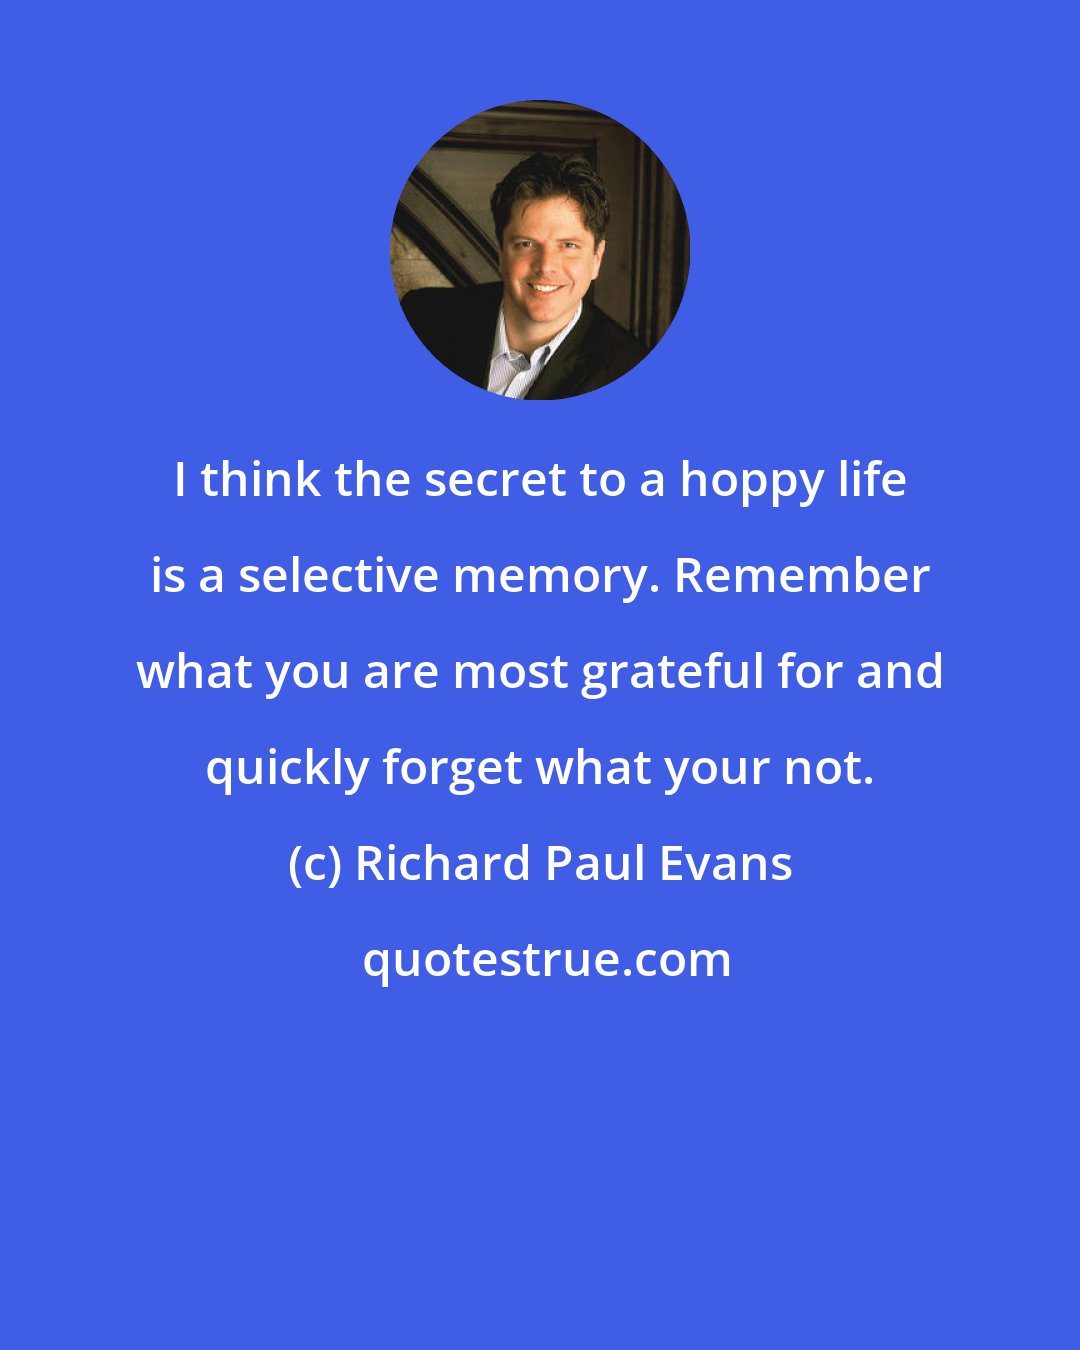 Richard Paul Evans: I think the secret to a hoppy life is a selective memory. Remember what you are most grateful for and quickly forget what your not.